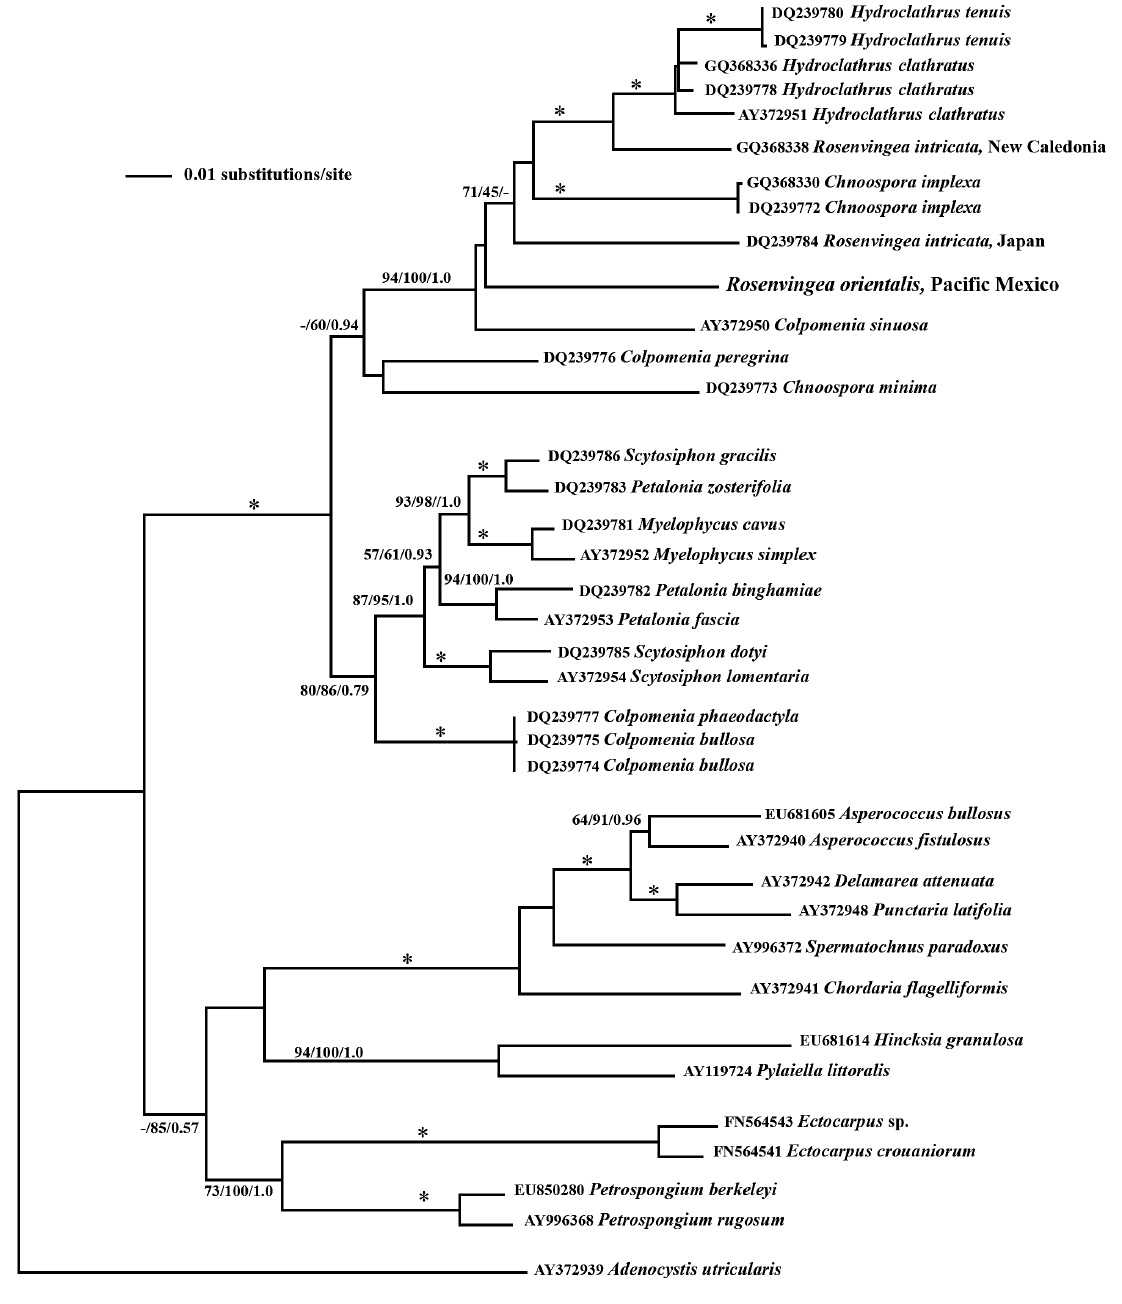 Phylogenetic relationships based on maximum-likelihood analysis of a data set (1398 characters) of chloroplast-encoded psaA. Selected outgroup is Adenocystis utricularis. Values above branches = Maximum-parsimony bootstrap values (MPBP) in % > 50% / Maximum-likelihood bootstrap values (MLBP) in % / Bayesian posterior probabilities (PP) ？ 0.7.*？ 95% MPBP ？ 95% MLBP ？ 0.95 PP.